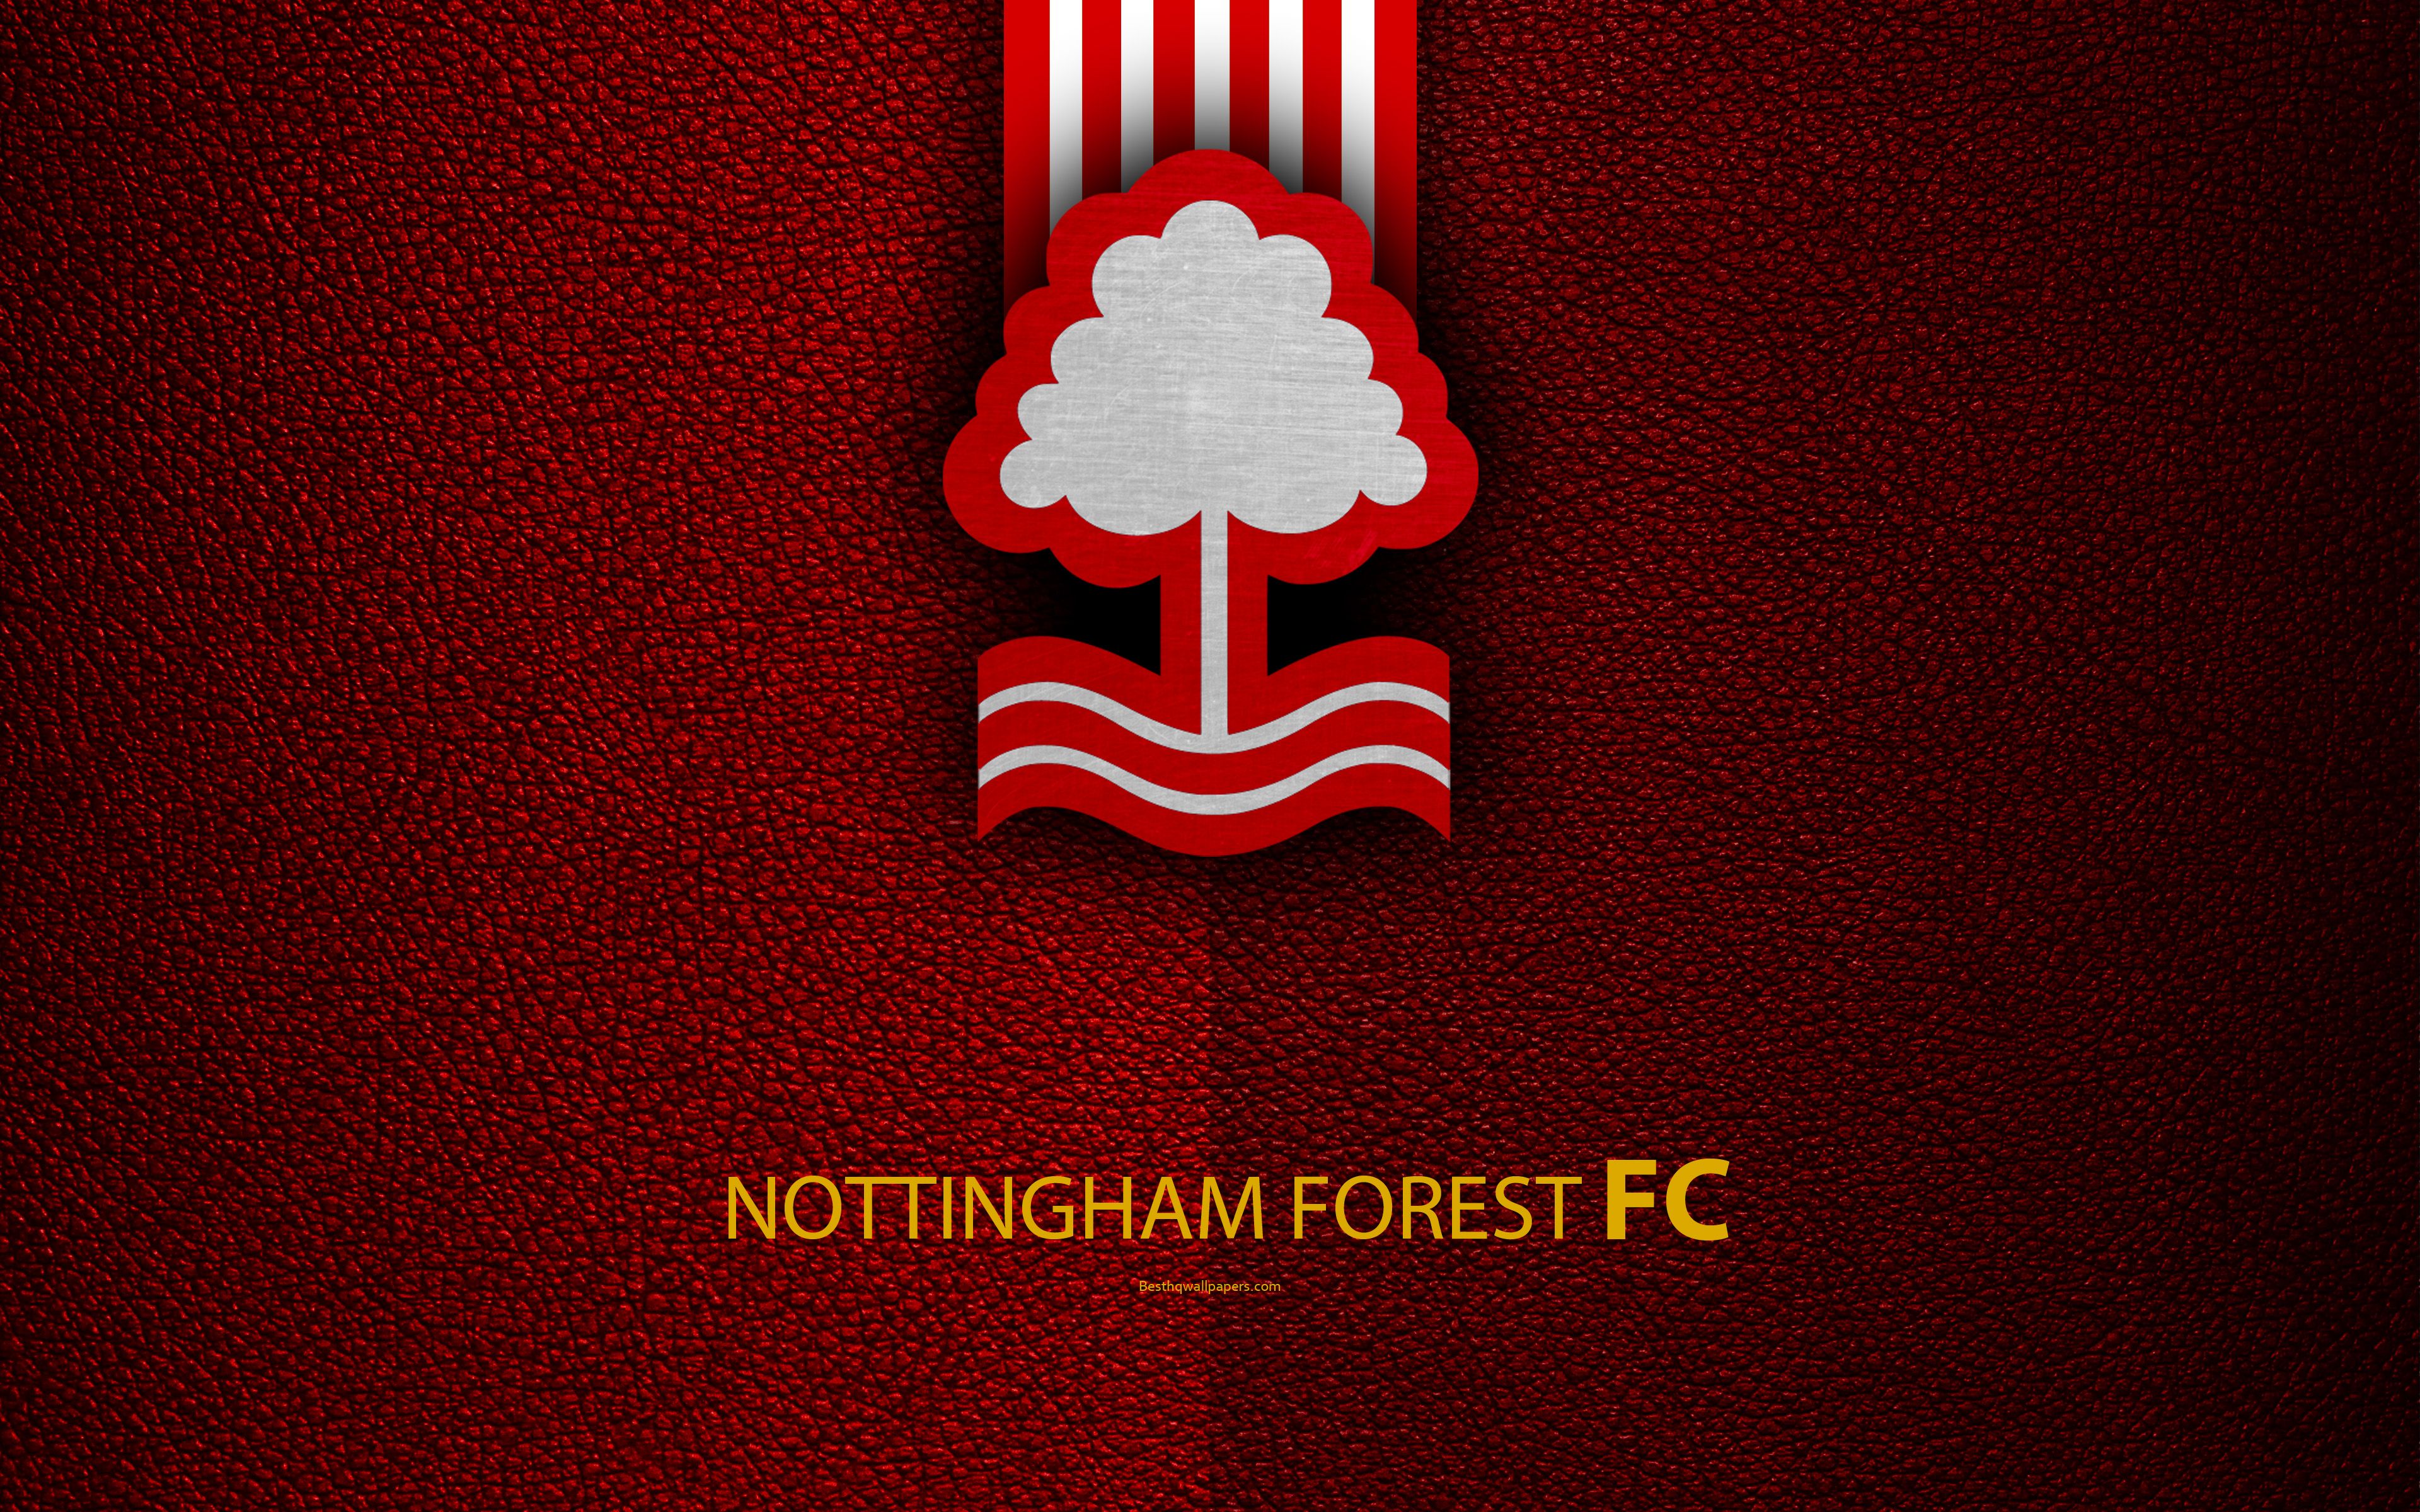 Download wallpaper Nottingham Forest FC, 4K, English Football Club, logo, Football League Championship, leather texture, Nottingham, UK, EFL, football, Second English Division for desktop with resolution 3840x2400. High Quality HD picture wallpaper